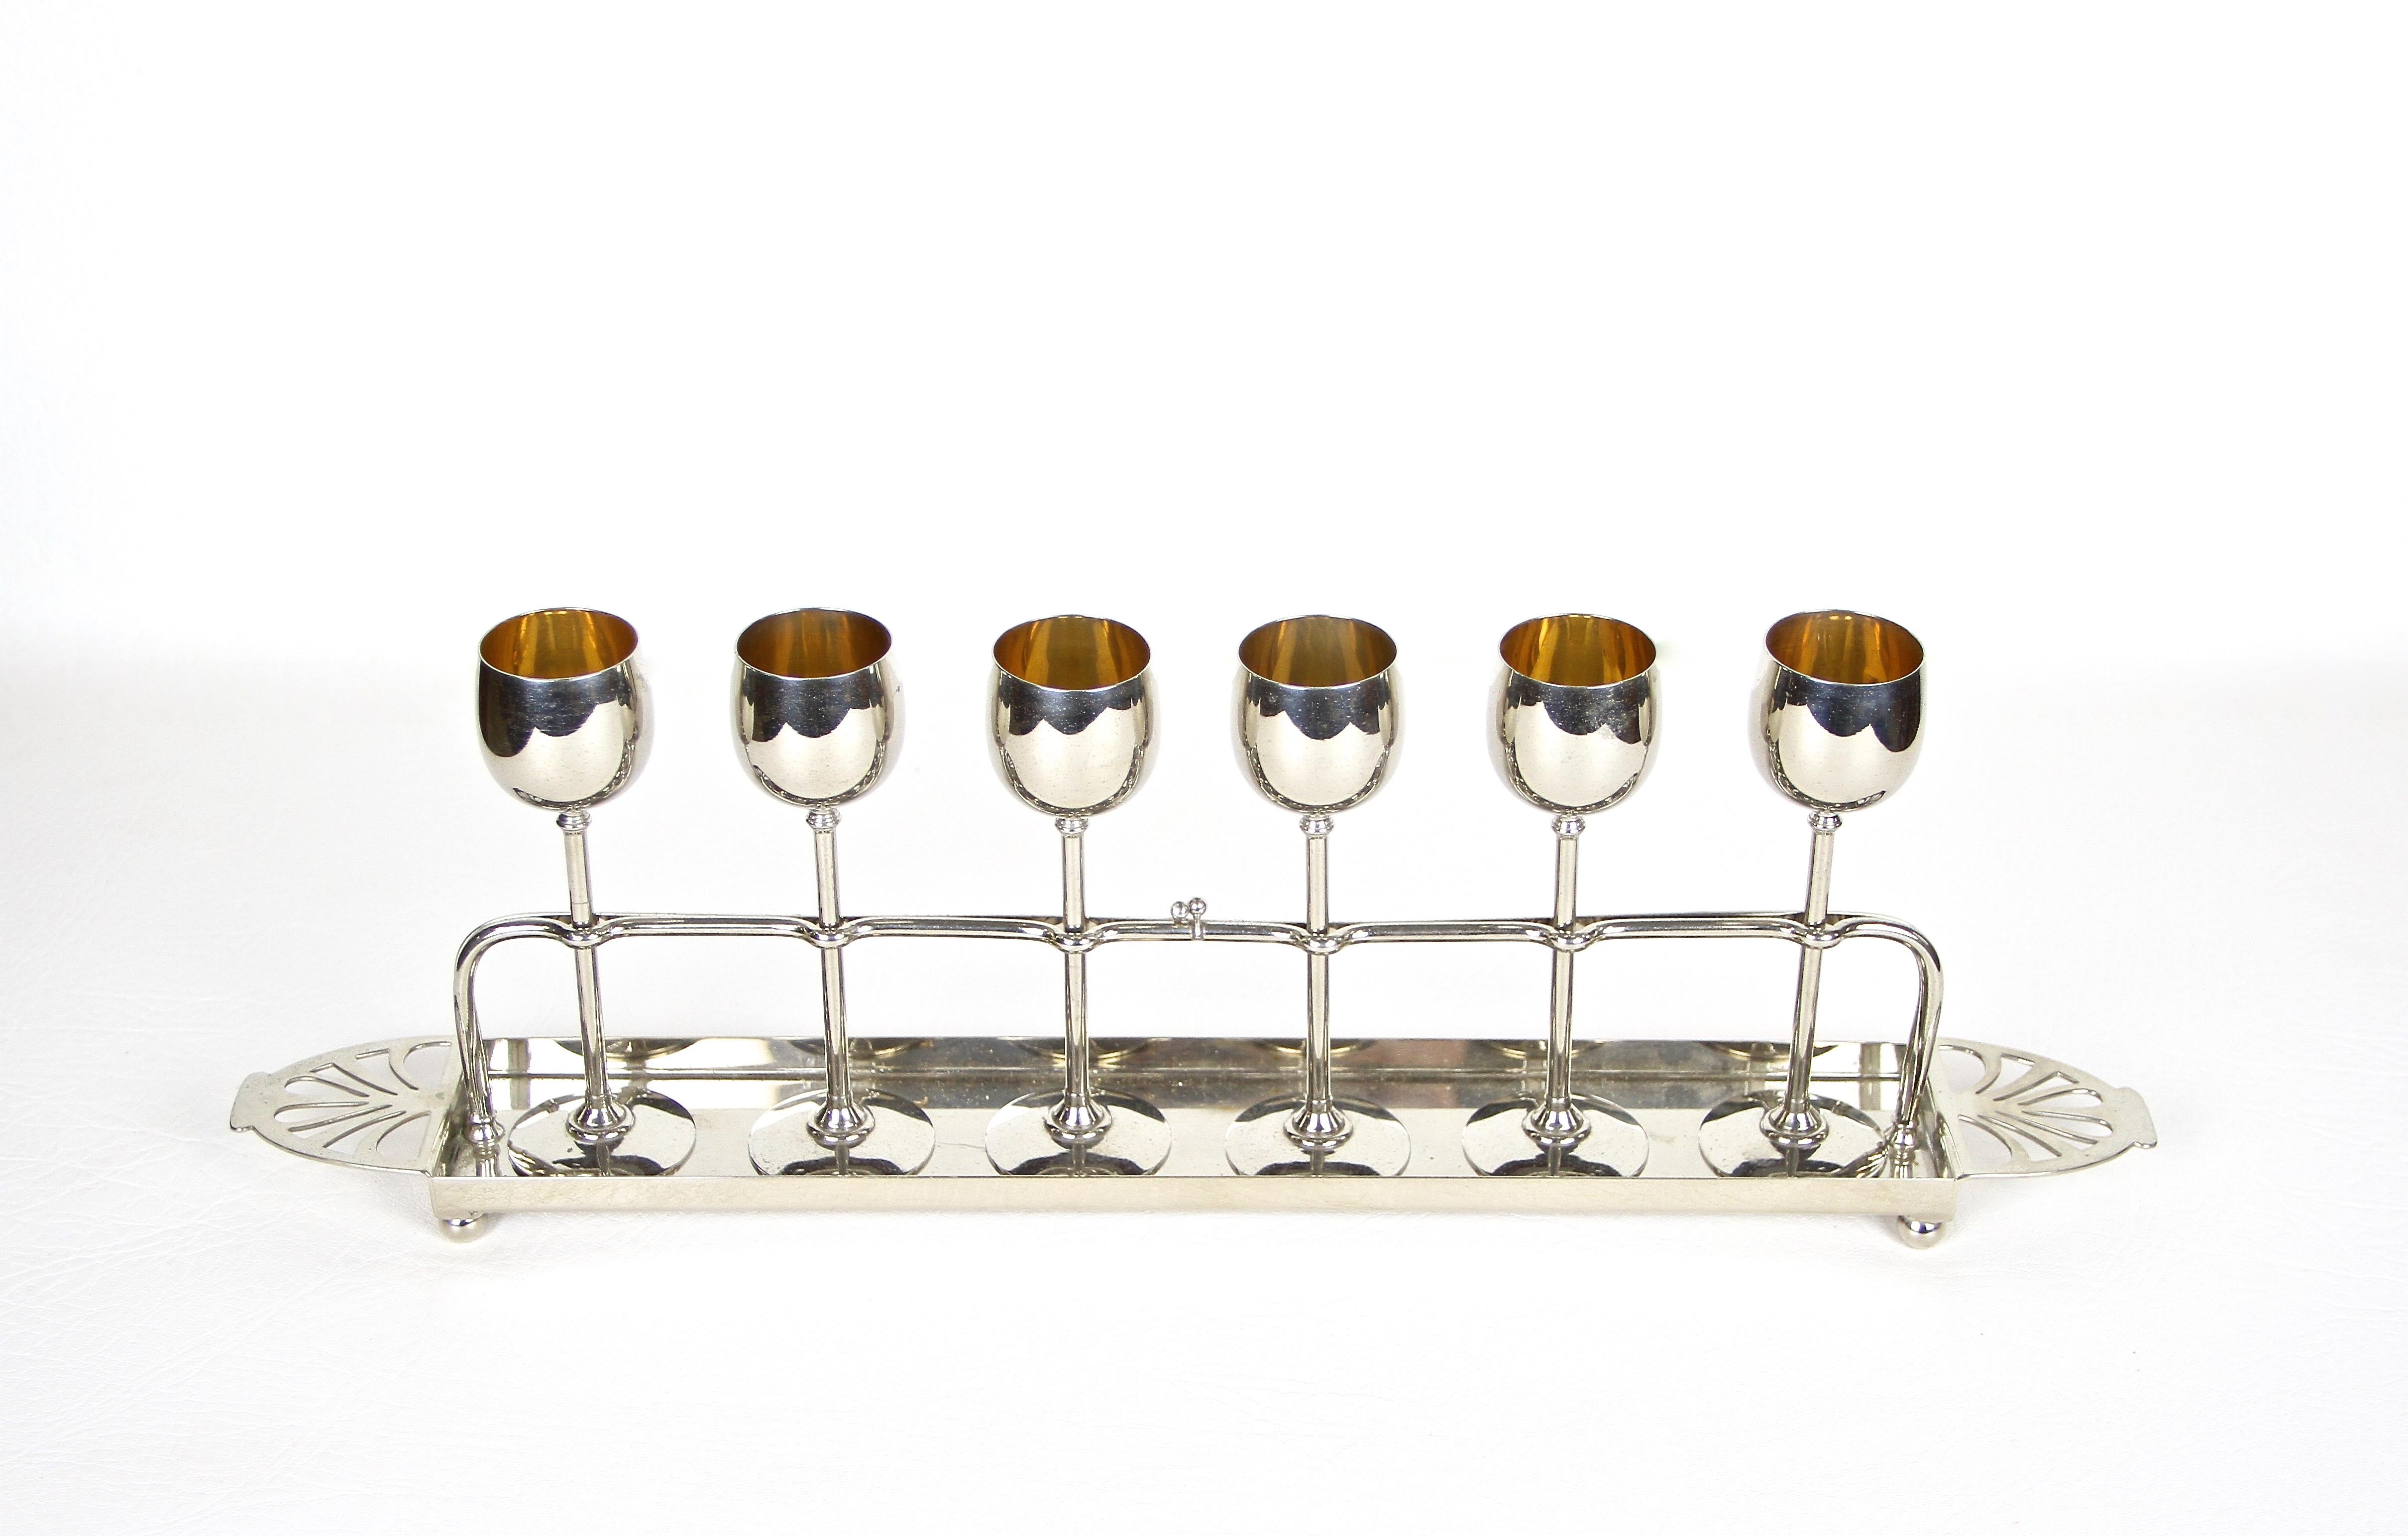 Superb Art Nouveau Liquor set from the period around 1910 in Germany made by the renown company of WMF. An outstanding liquor set consisting of six lovely shaped goblets, set on an artfully designed nickel plated metal stand. All glasses are fixed